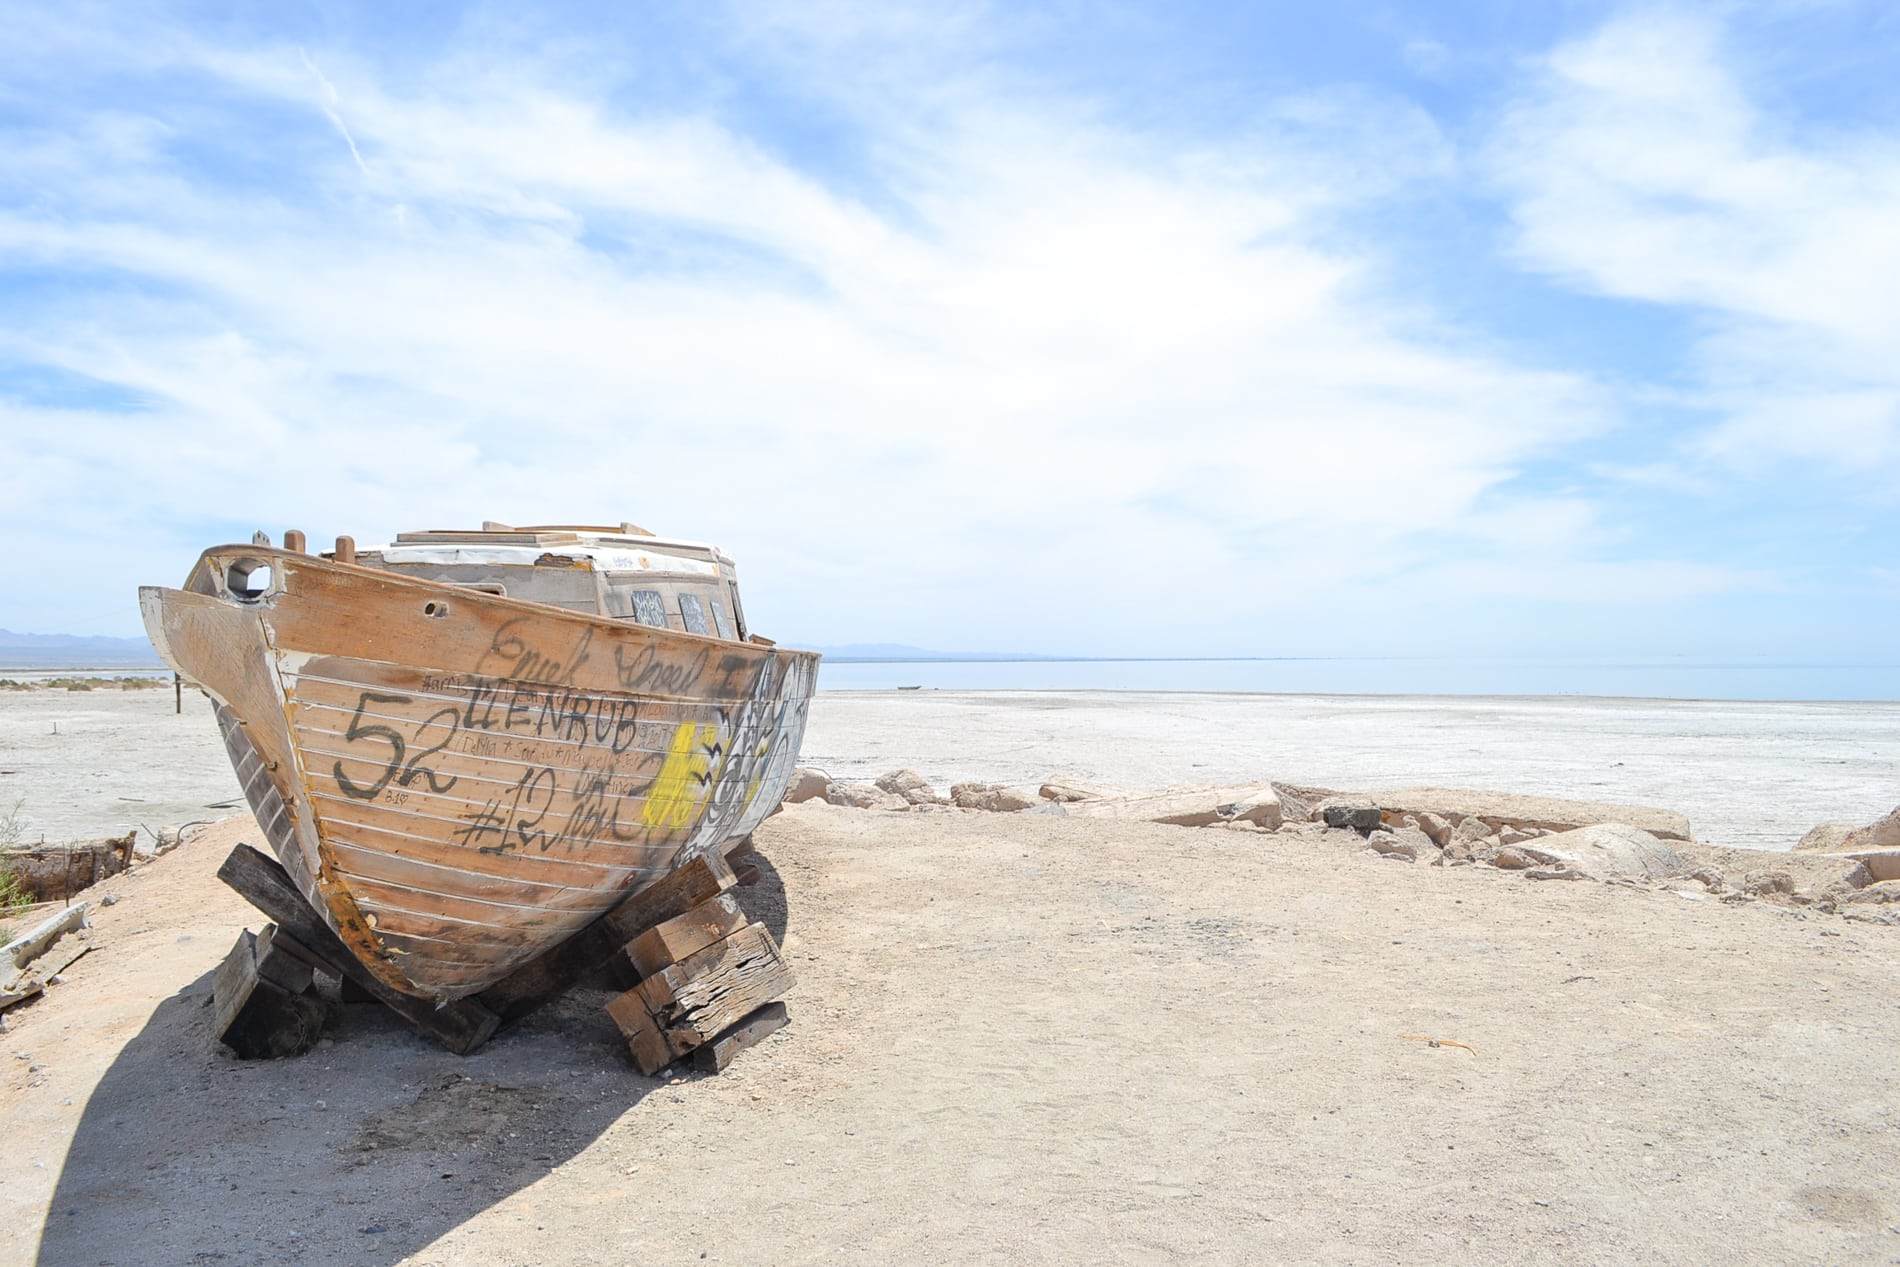 More to see on the eastern shore of the Salton Sea